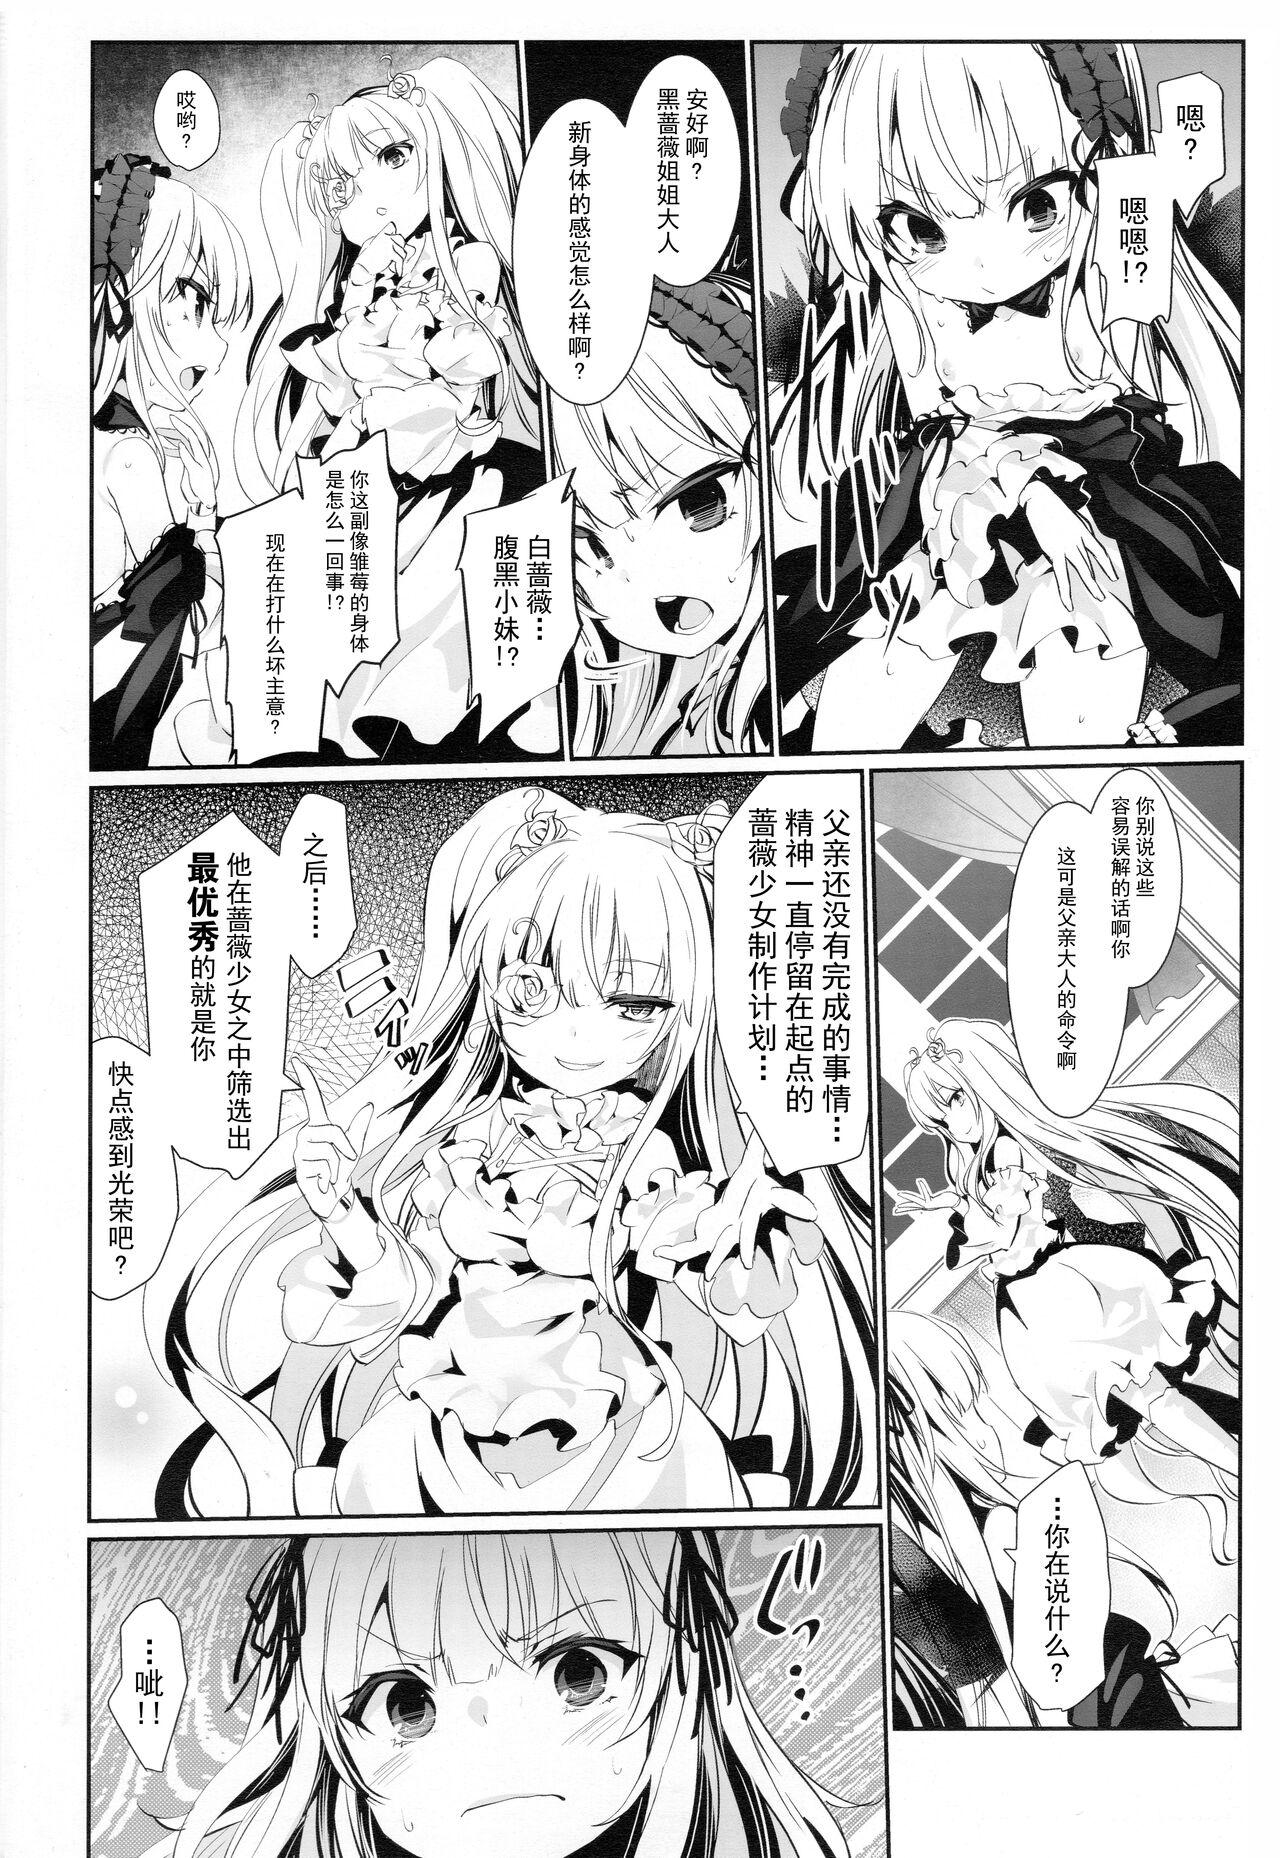 Gayemo Glamour Growth - Rozen maiden Shaven - Page 3